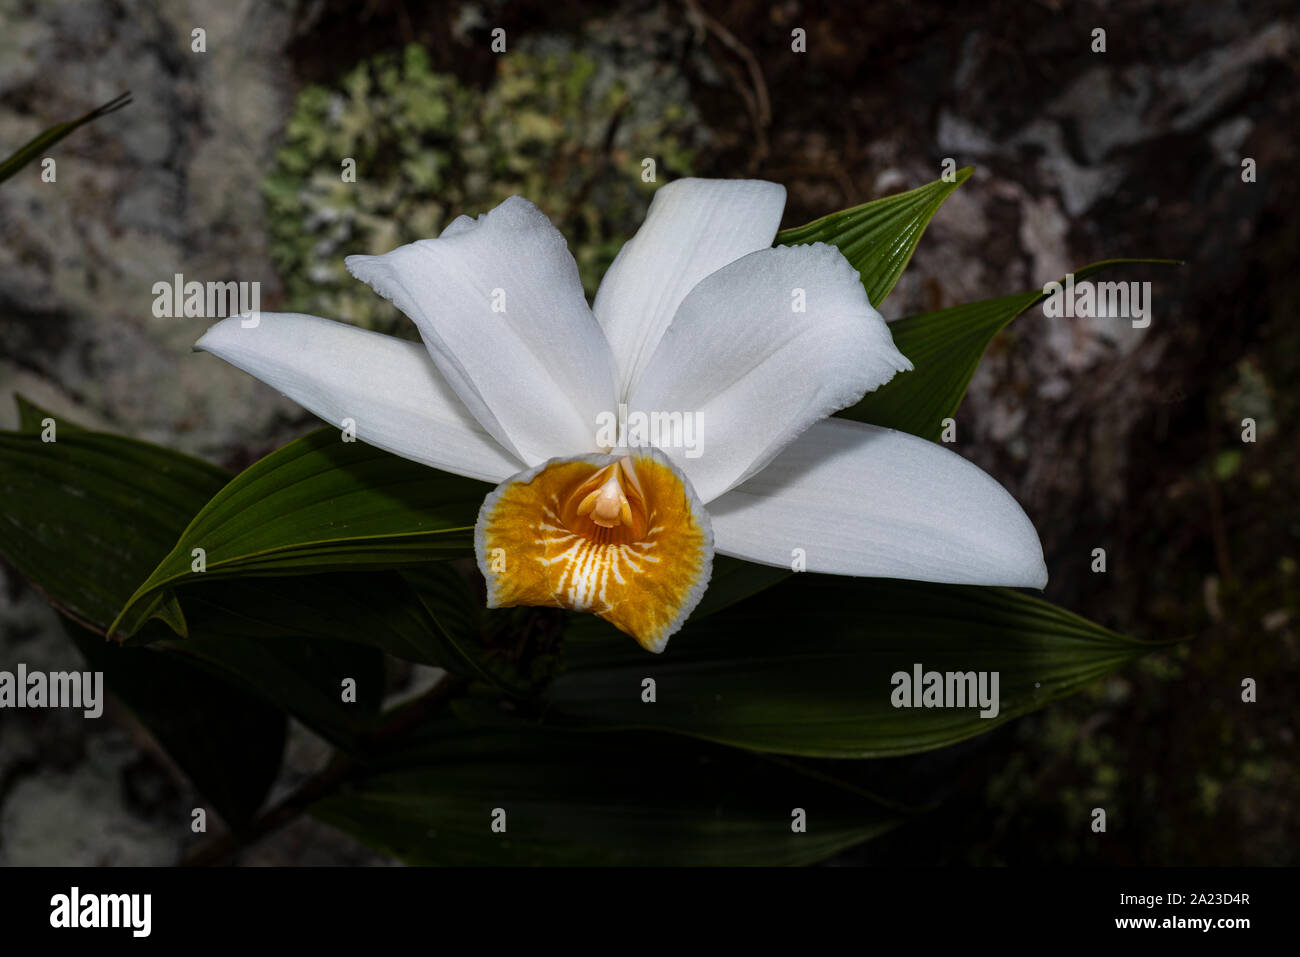 White sobralia orchid with stone in the background image taken in Panamas cloud forest Stock Photo